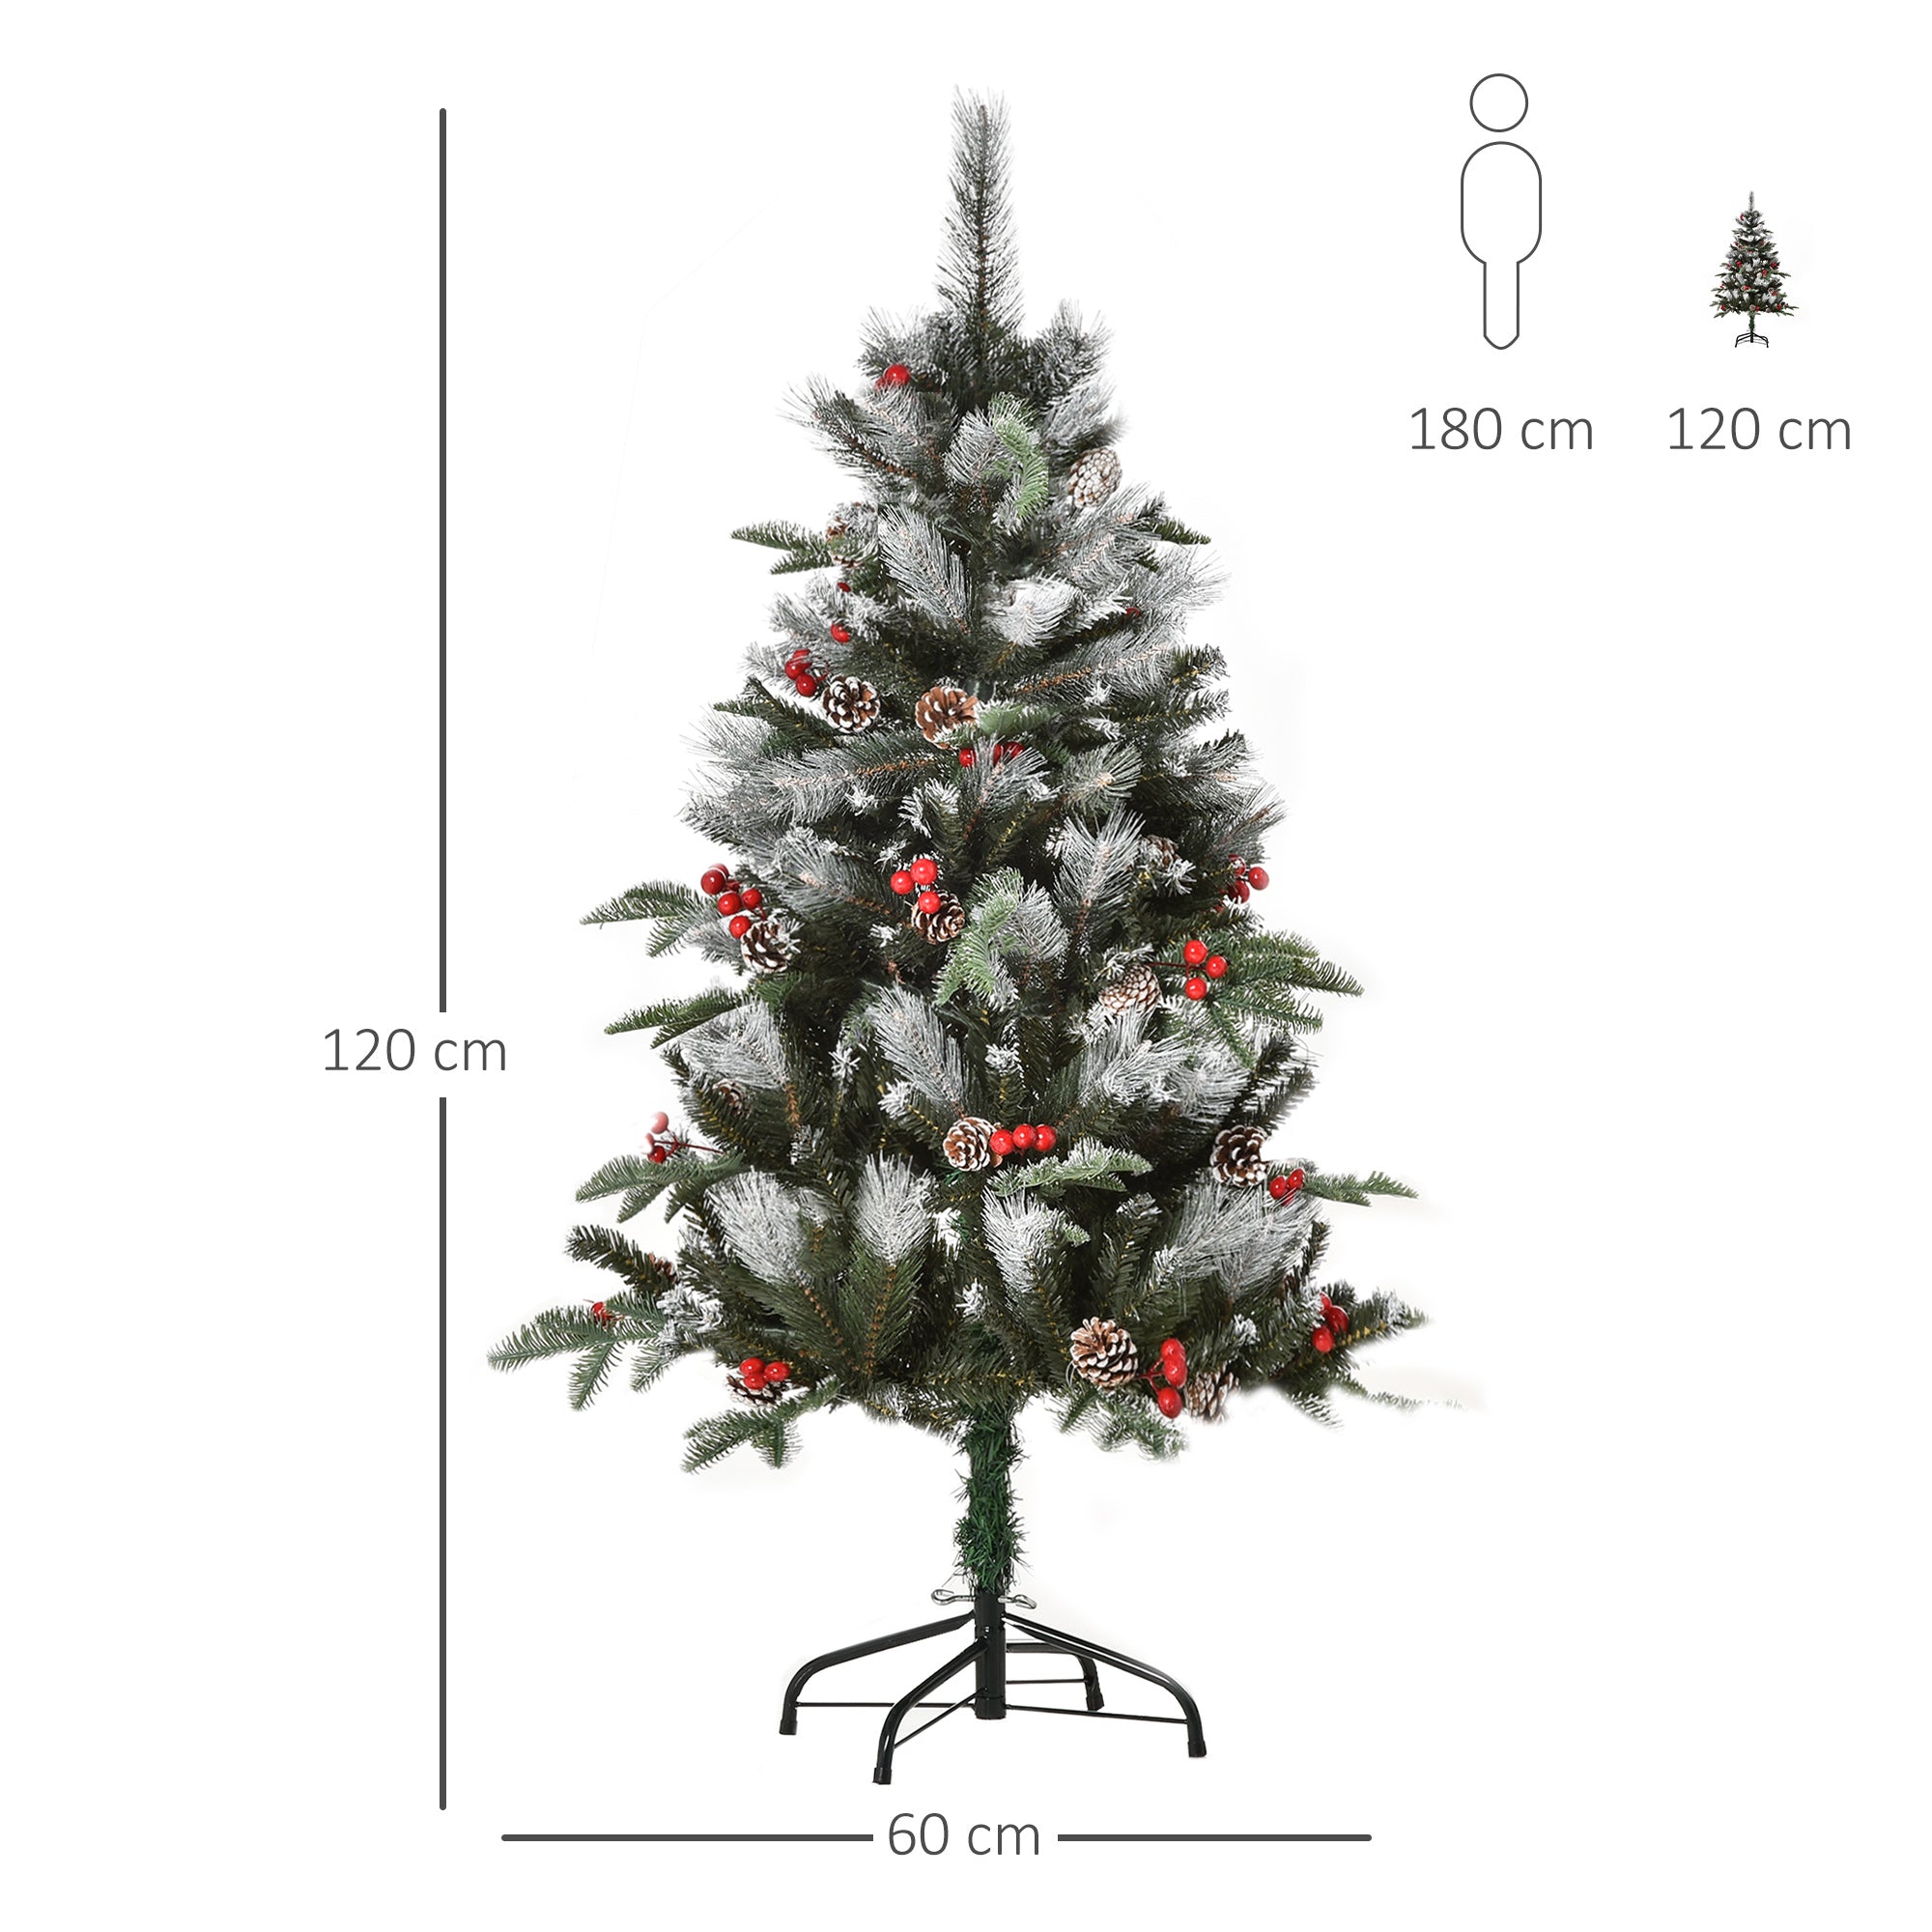 HOMCOM 4FT Artificial Snow Dipped Christmas Tree Xmas Pencil Tree Holiday Home Party Decoration with Foldable Feet Red Berries White Pinecones, Green - Inspirely